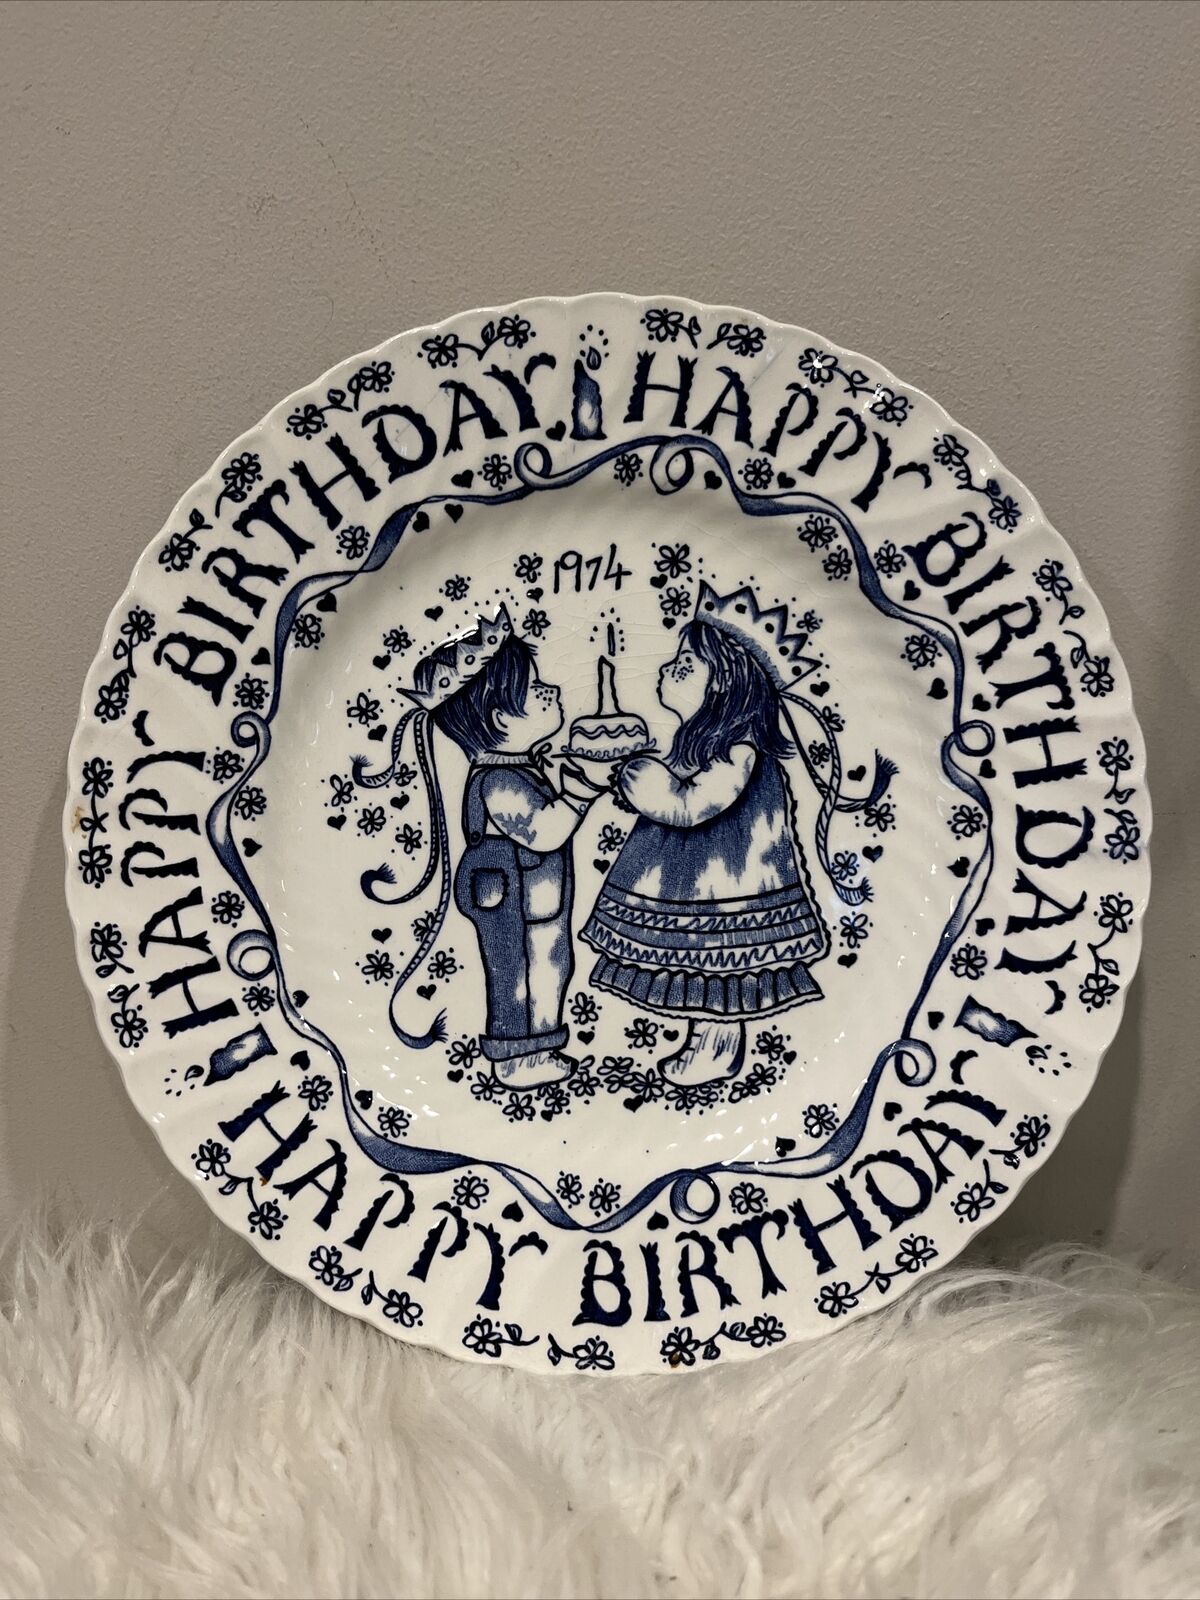 Vintage Norma Sherman 1974 Happy Birthday Plate Crownford China Co England